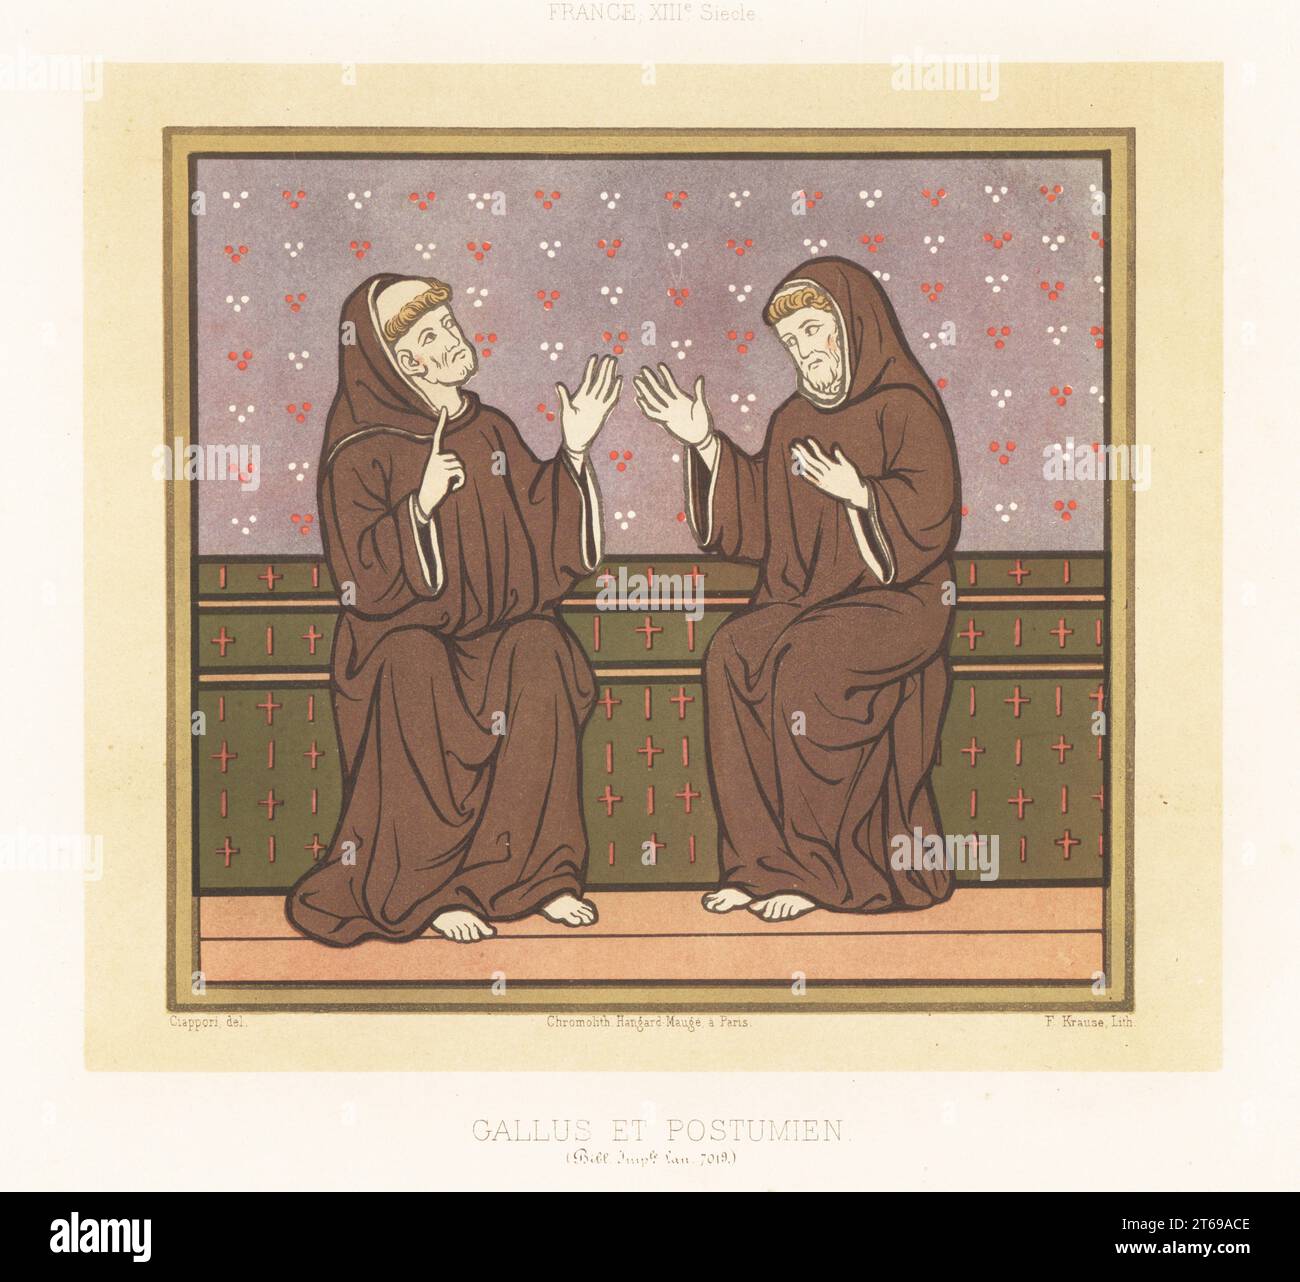 Postumien telling of his pilgrimage in Egypt to Gallus, a disciple of Saint Martin. Both wearing brown Franciscan hooded habits. Gallus et Postumien, France, XIIIe siecle. From a manuscript on the Life of Saint Martin, Lan. MS 7019, Bibliotheque Imperiale. Chromolithograph by F. Krause after an illustration by Claudius Joseph Ciappori from Charles Louandres Les Arts Somptuaires, The Sumptuary Arts, Hangard-Mauge, Paris, 1858. Stock Photo